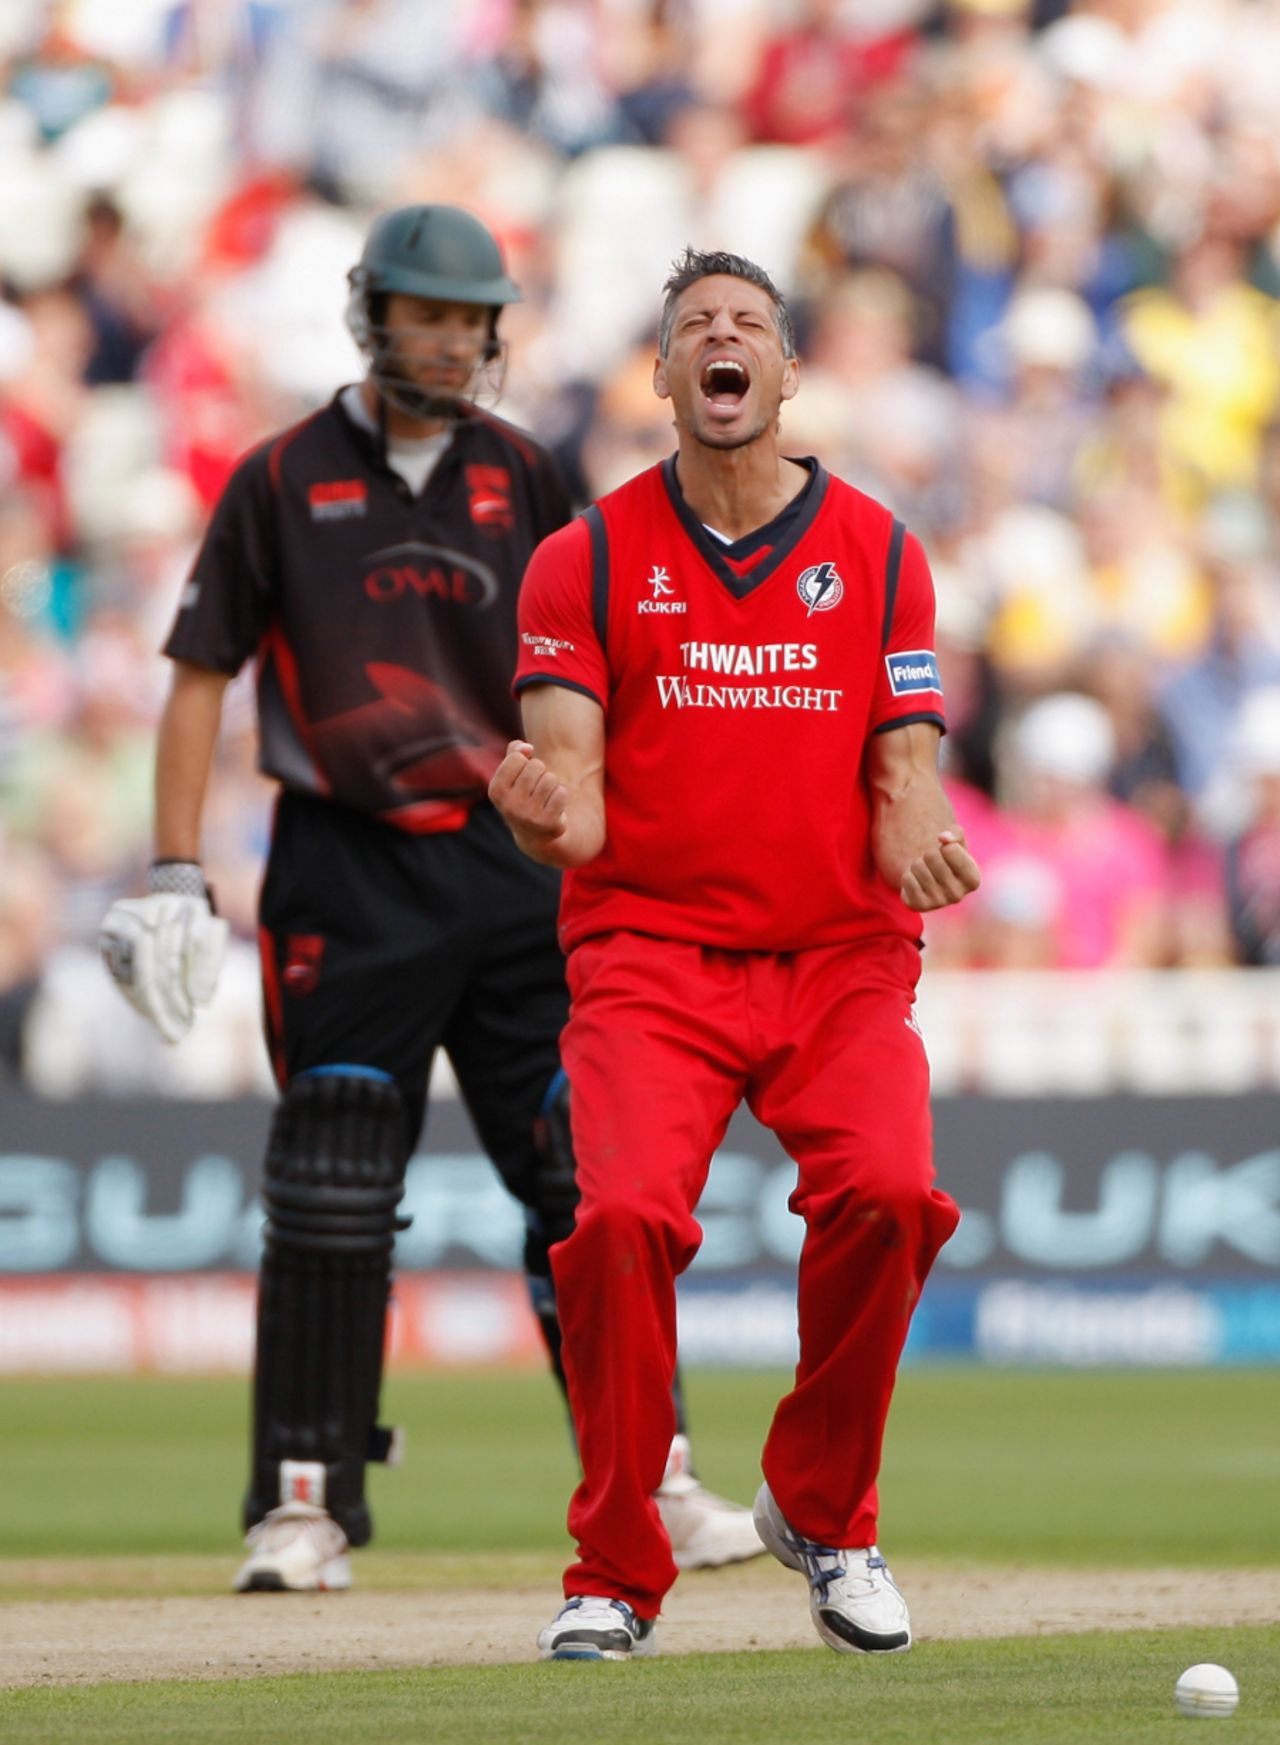 Sajid Mahmood roars in celebration after striking with his first ball of the match, Lancashire v Leicestershire, Friends Life t20, 1st Semi Final, Edgbaston, August 27 2011